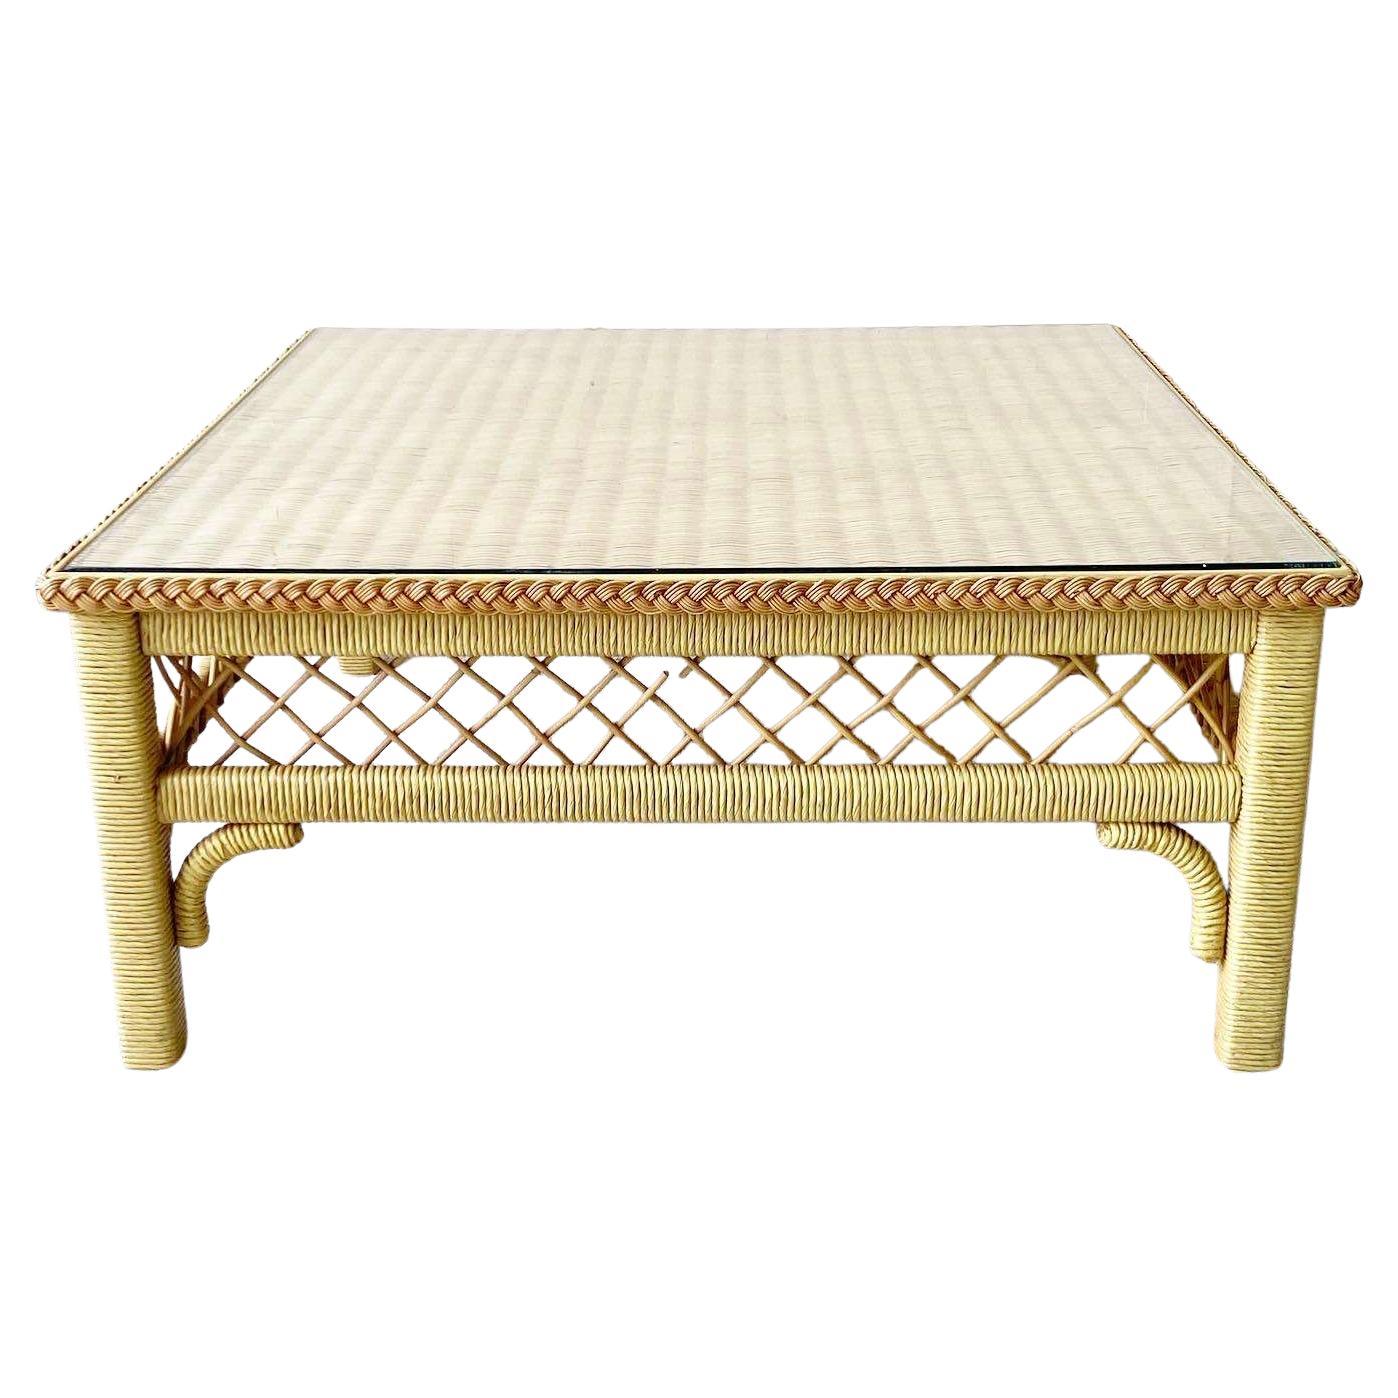 Boho Chic Wicker and Rattan Coffee Table With Glass Top by Henry Link